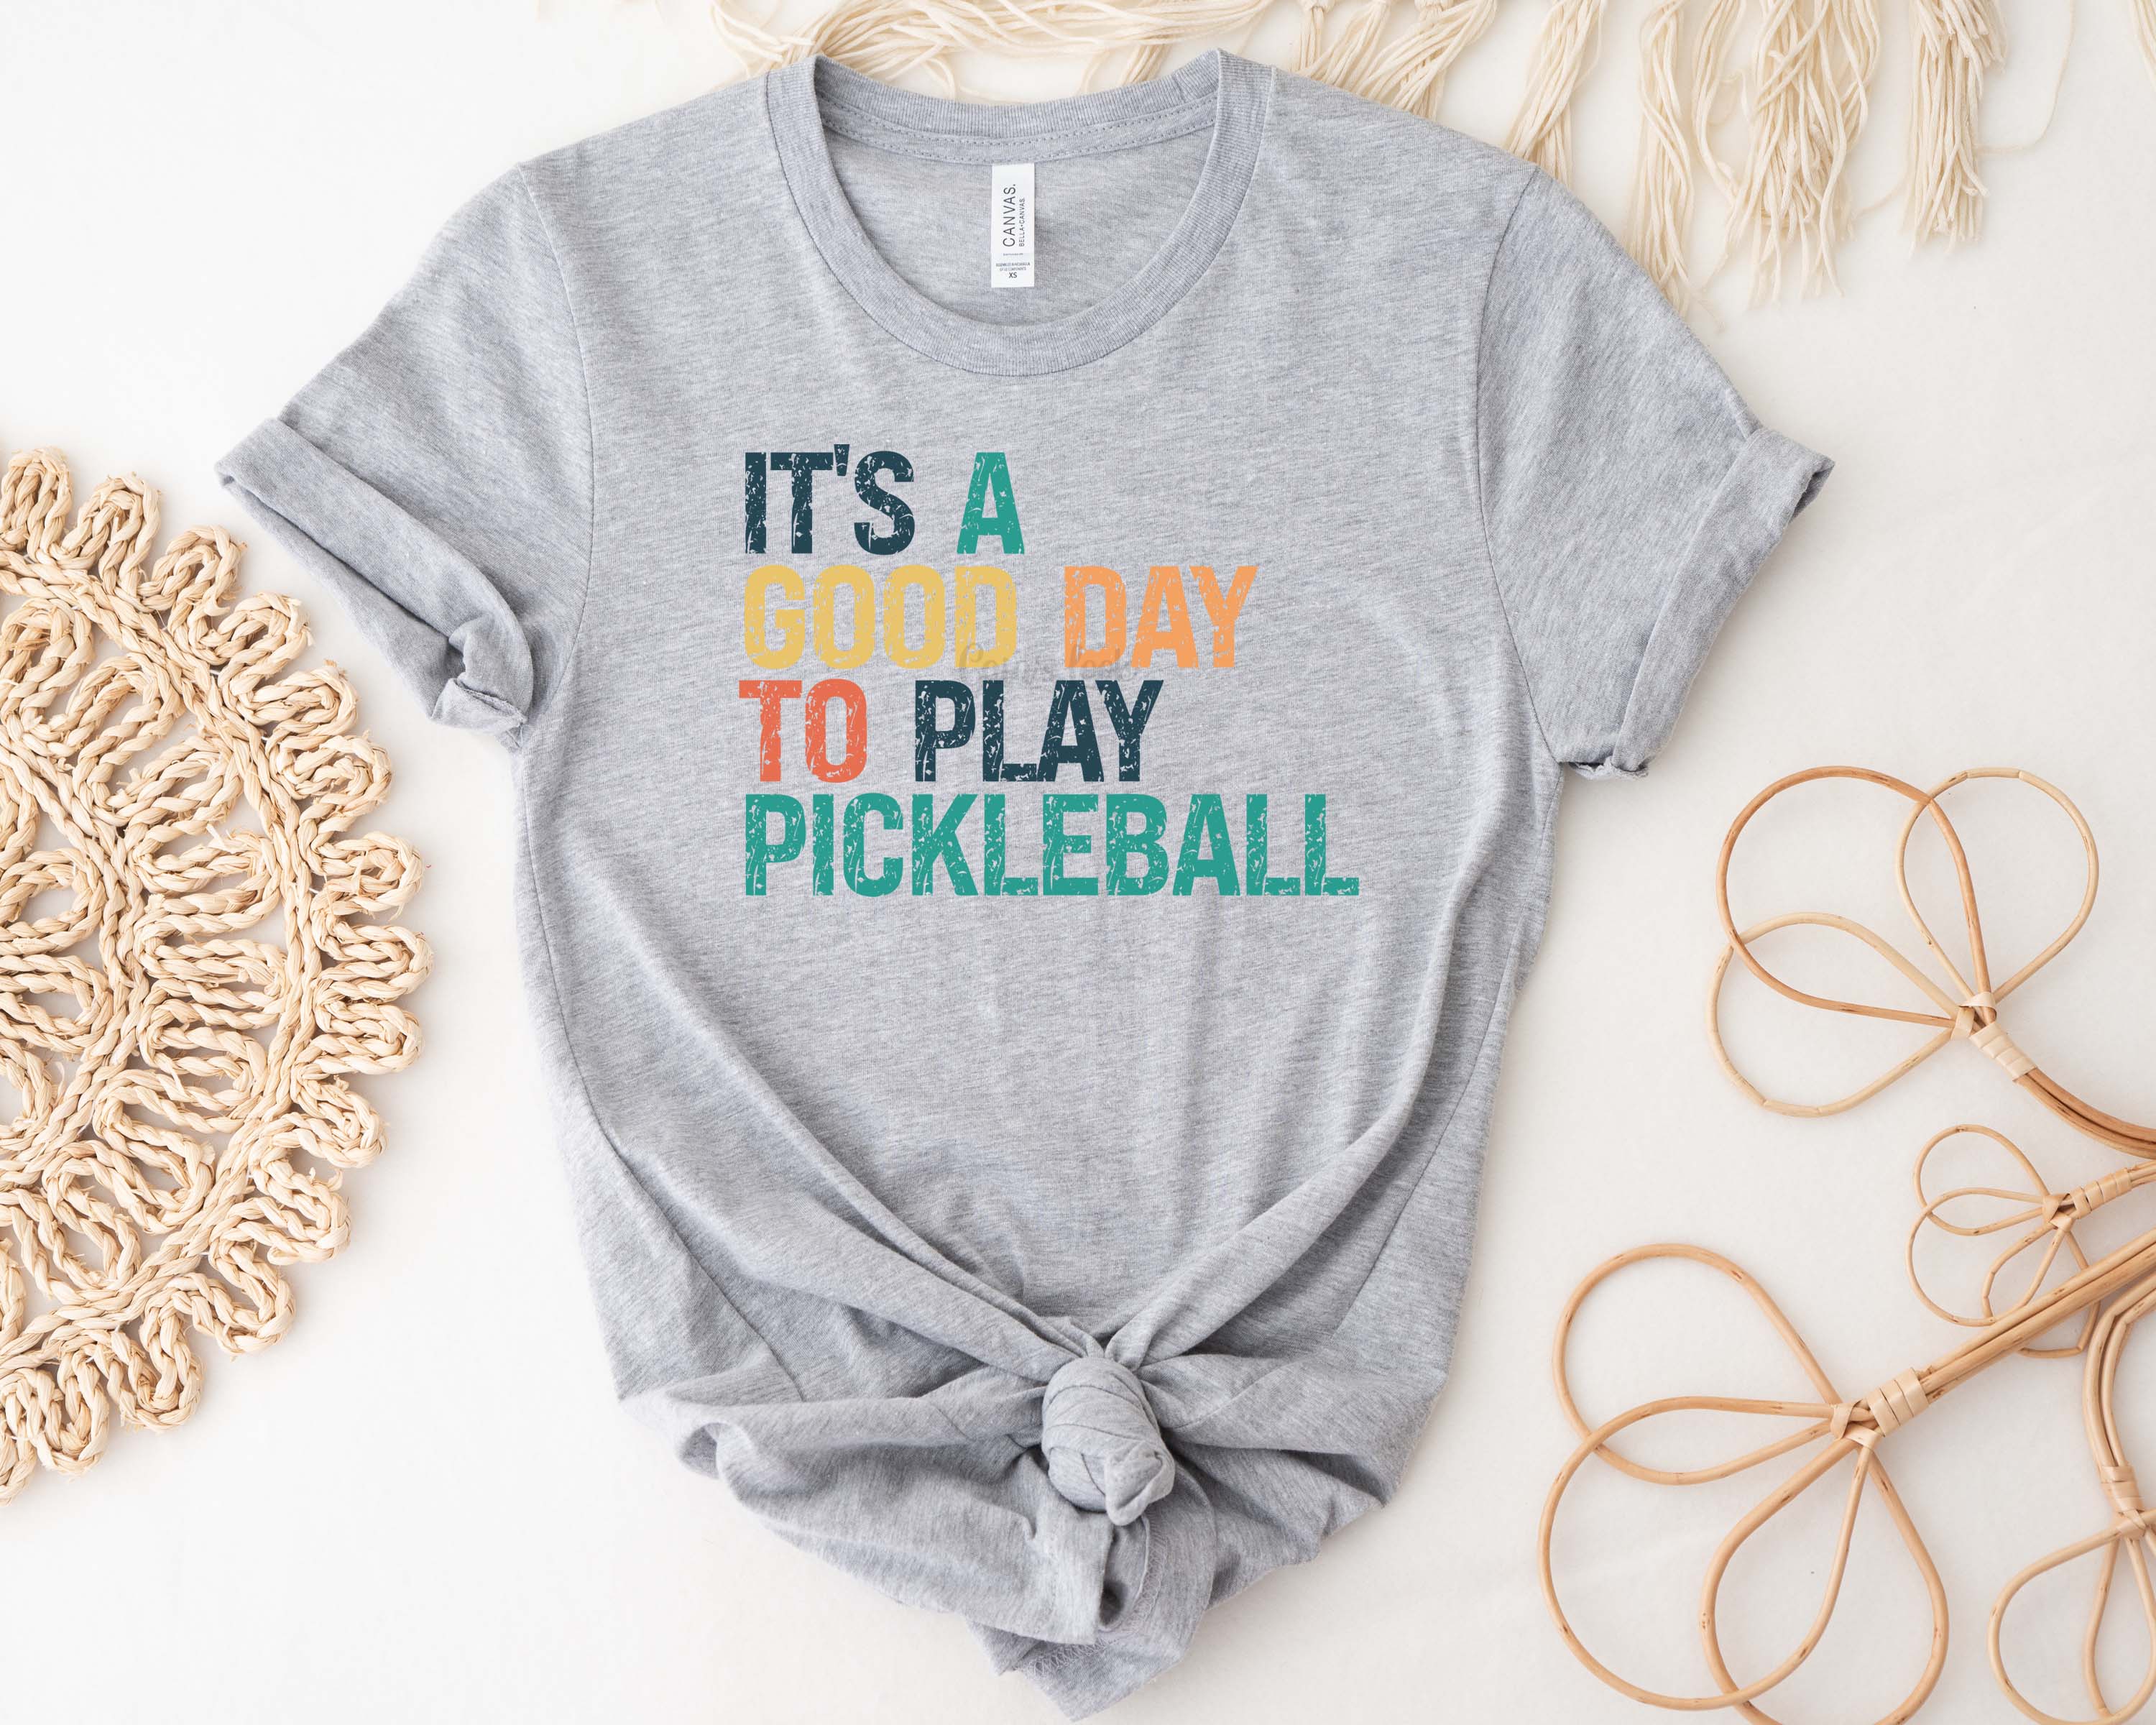 It's a good day to play pickleball gray shirt